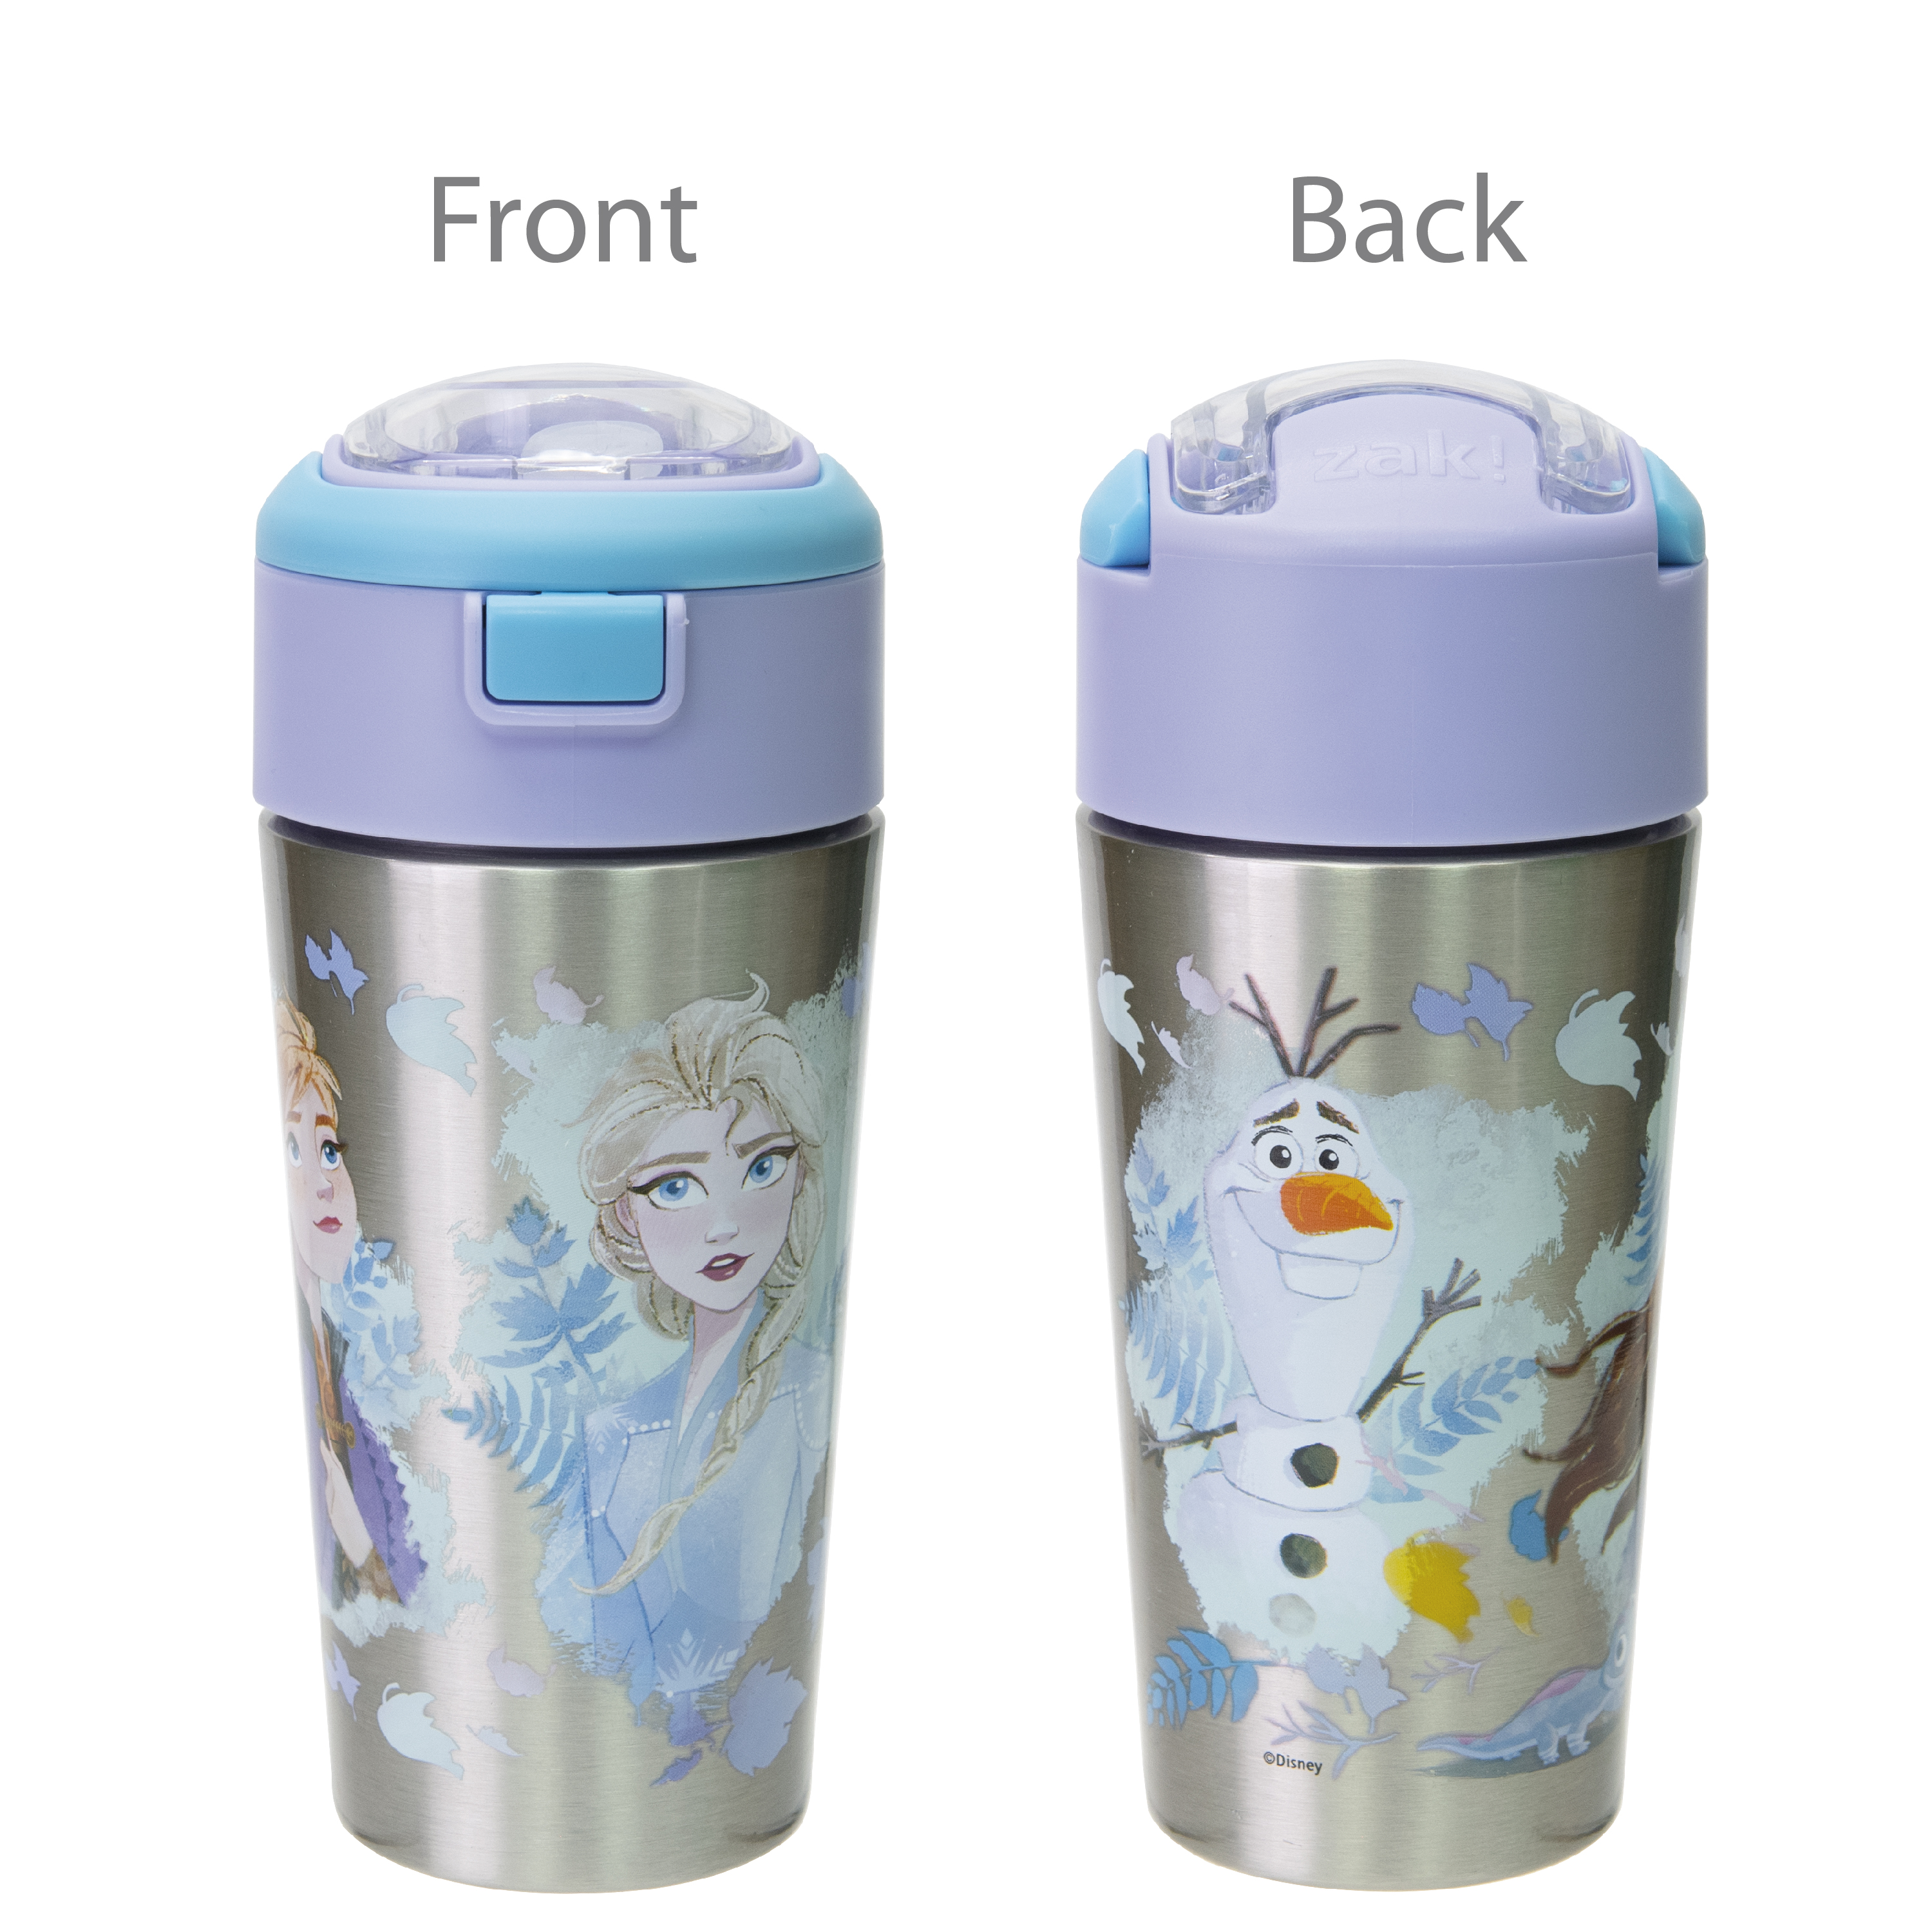 Disney Frozen 2 Movie 12 ounce Vacuum Insulated Reusable Stainless Steel Water Bottle, Anna, Elsa & Olaf slideshow image 8